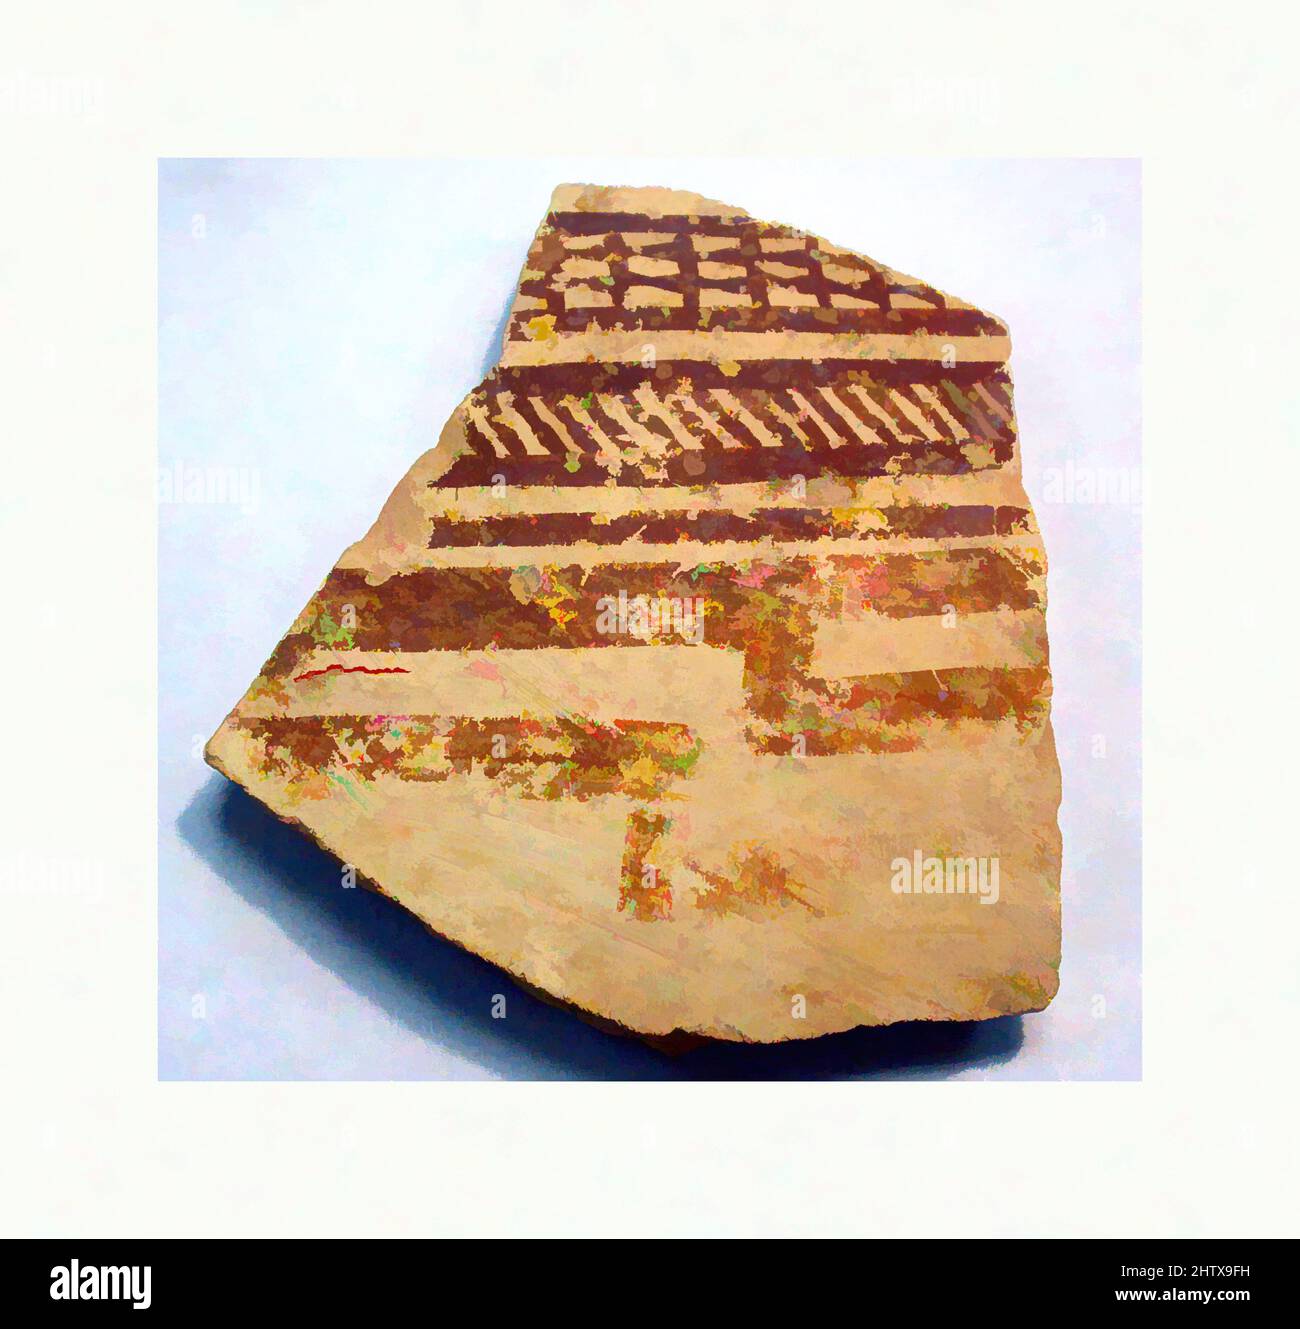 Art inspired by Sherds, Samarra, ca. mid-7th millennium B.C., Mesopotamia, Samarra, Samarra, Ceramic, paint, 7.9 cm x 6.9 cm x 1 cm, Ceramics-Vessels, Classic works modernized by Artotop with a splash of modernity. Shapes, color and value, eye-catching visual impact on art. Emotions through freedom of artworks in a contemporary way. A timeless message pursuing a wildly creative new direction. Artists turning to the digital medium and creating the Artotop NFT Stock Photo